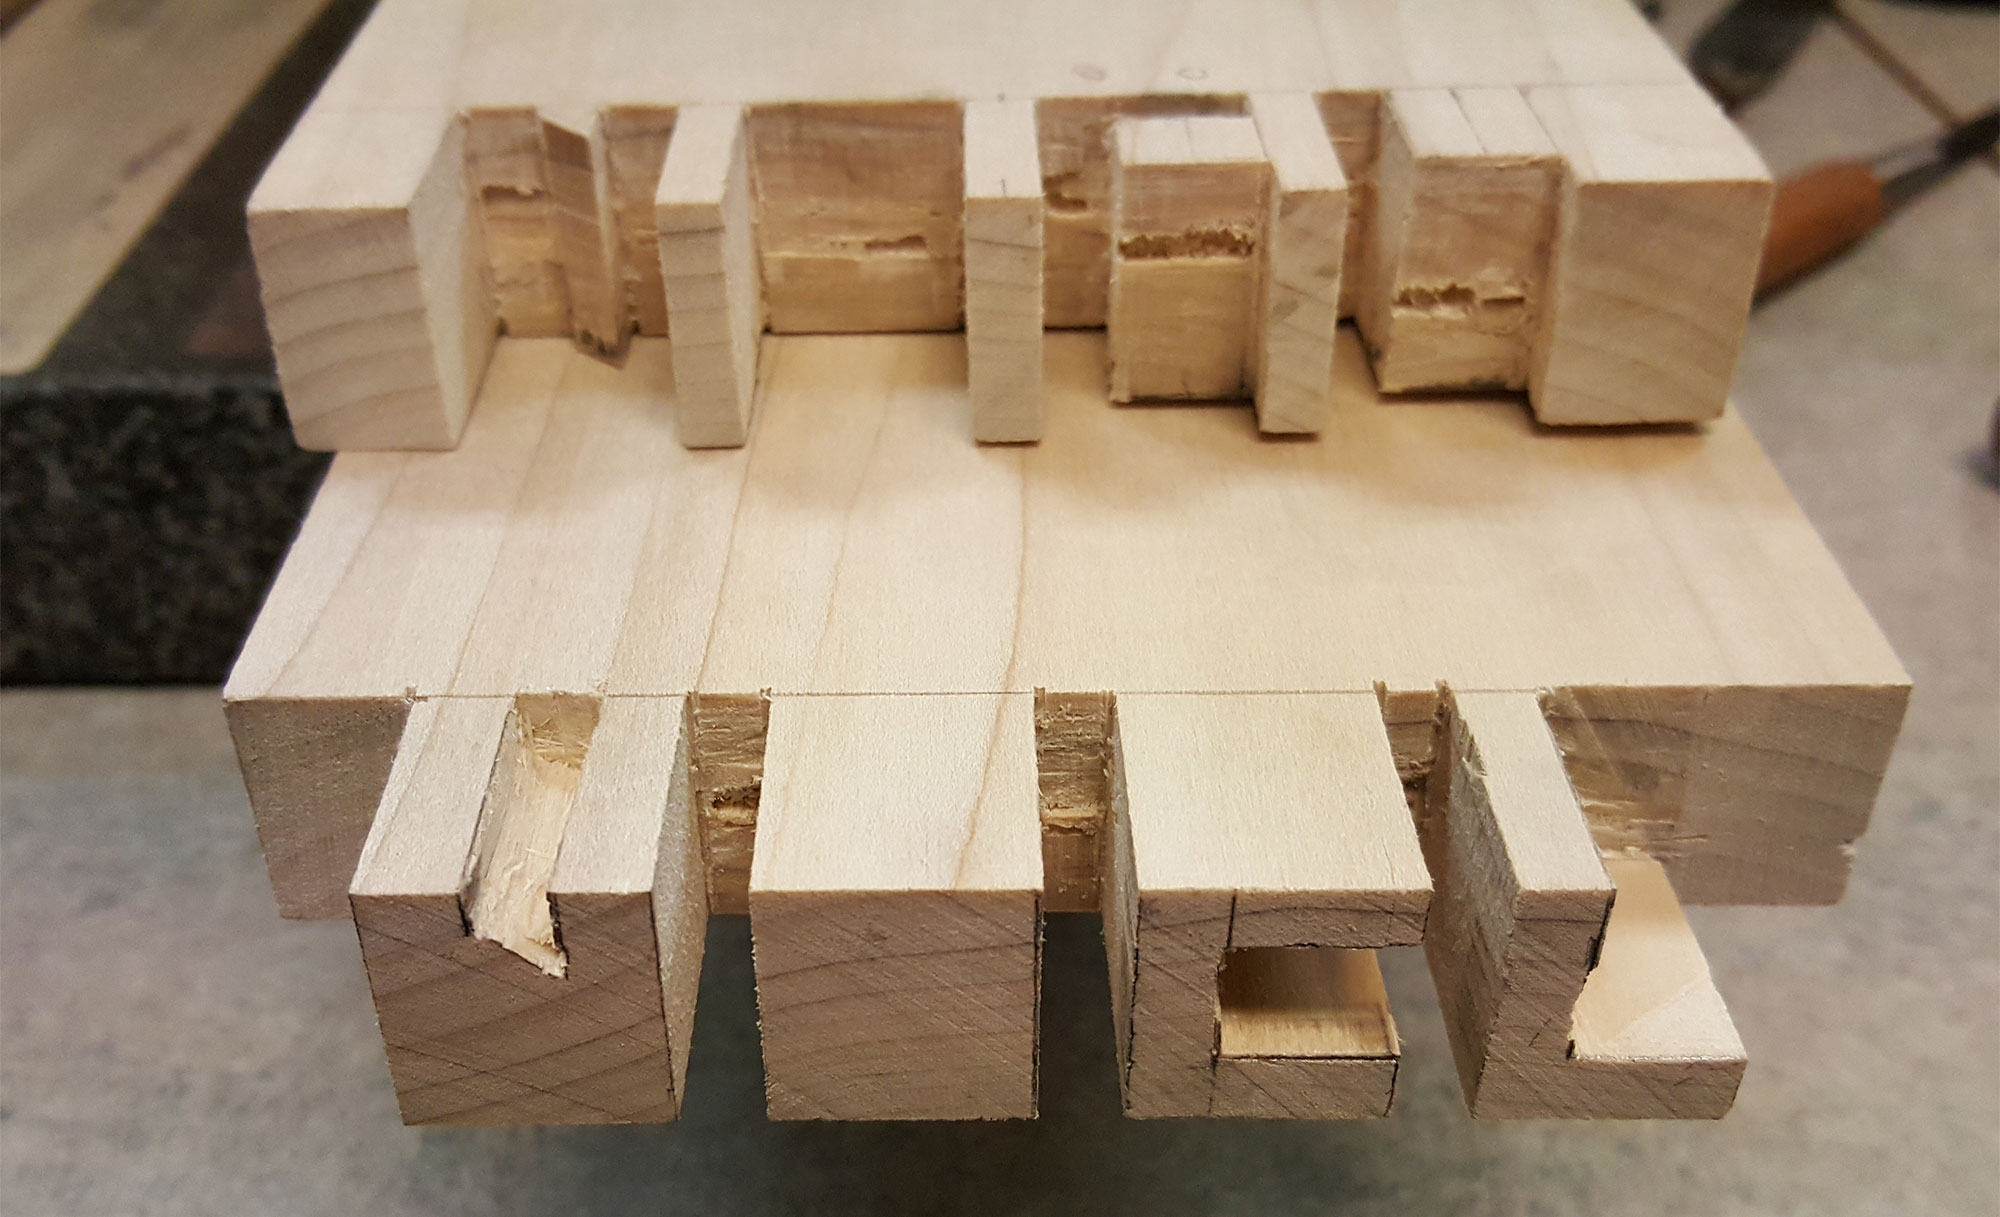 Join ready for glue-up